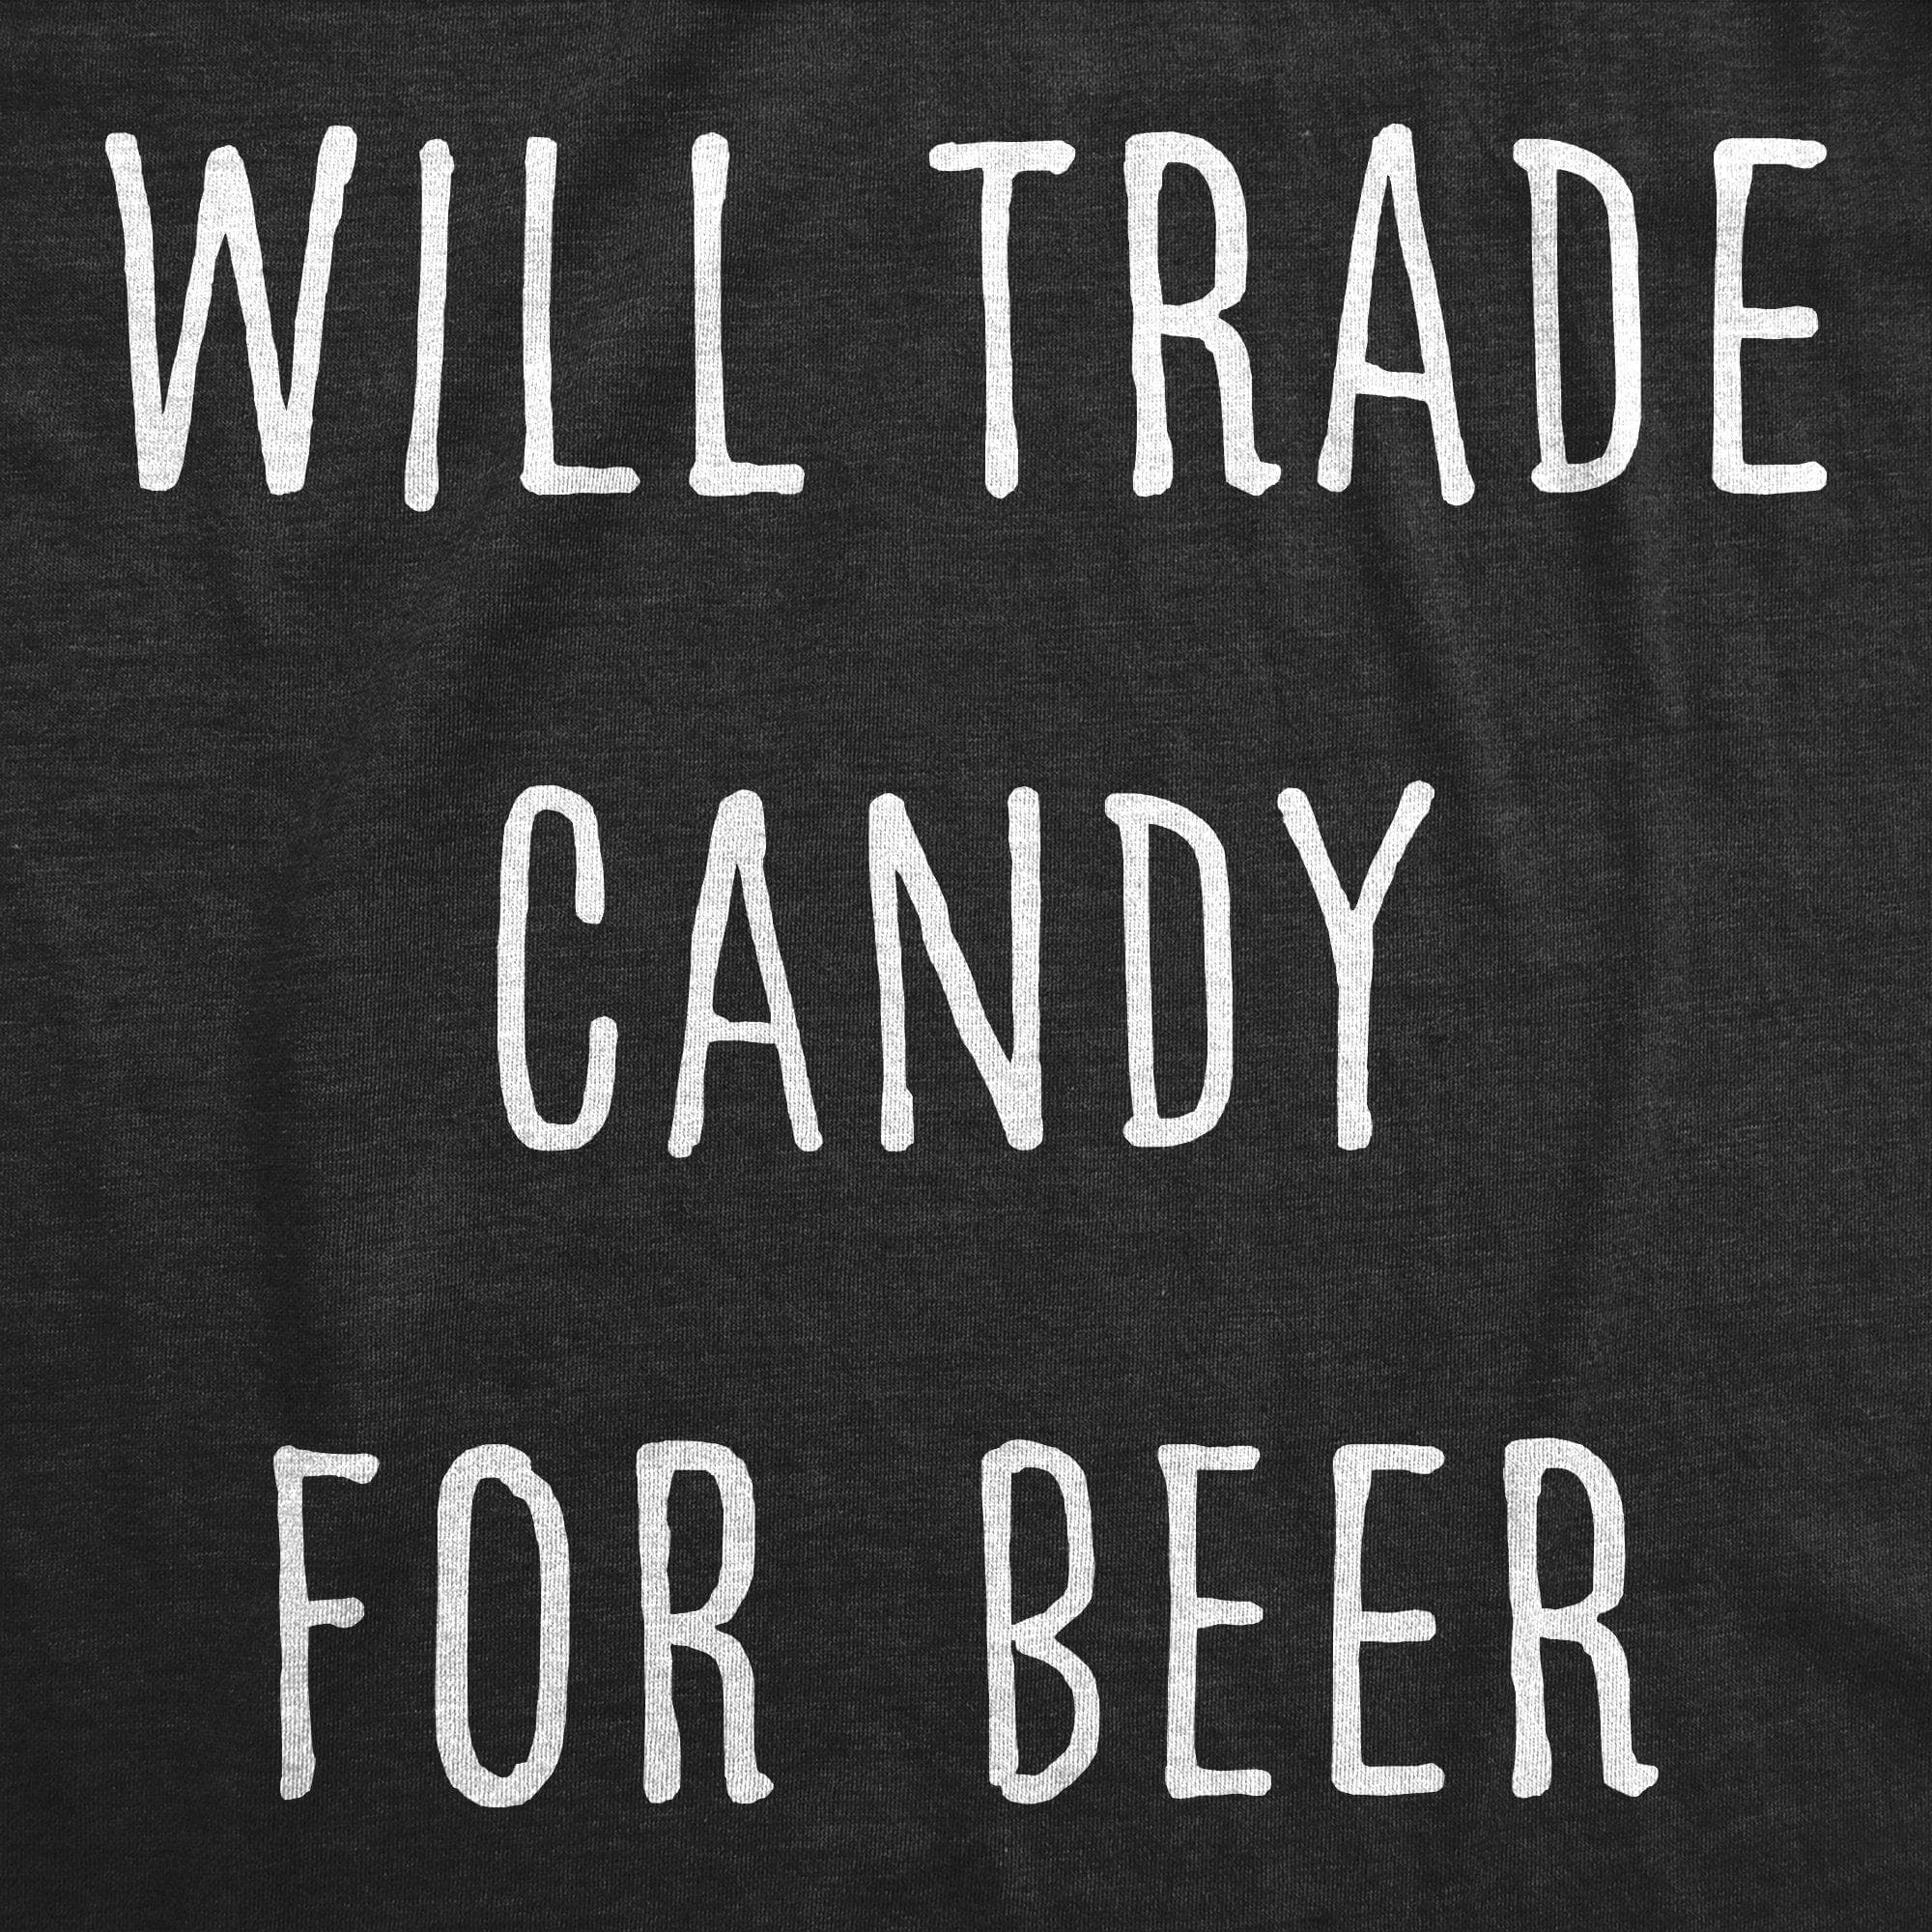 Will Trade Candy For Beer Men's Tshirt - Crazy Dog T-Shirts